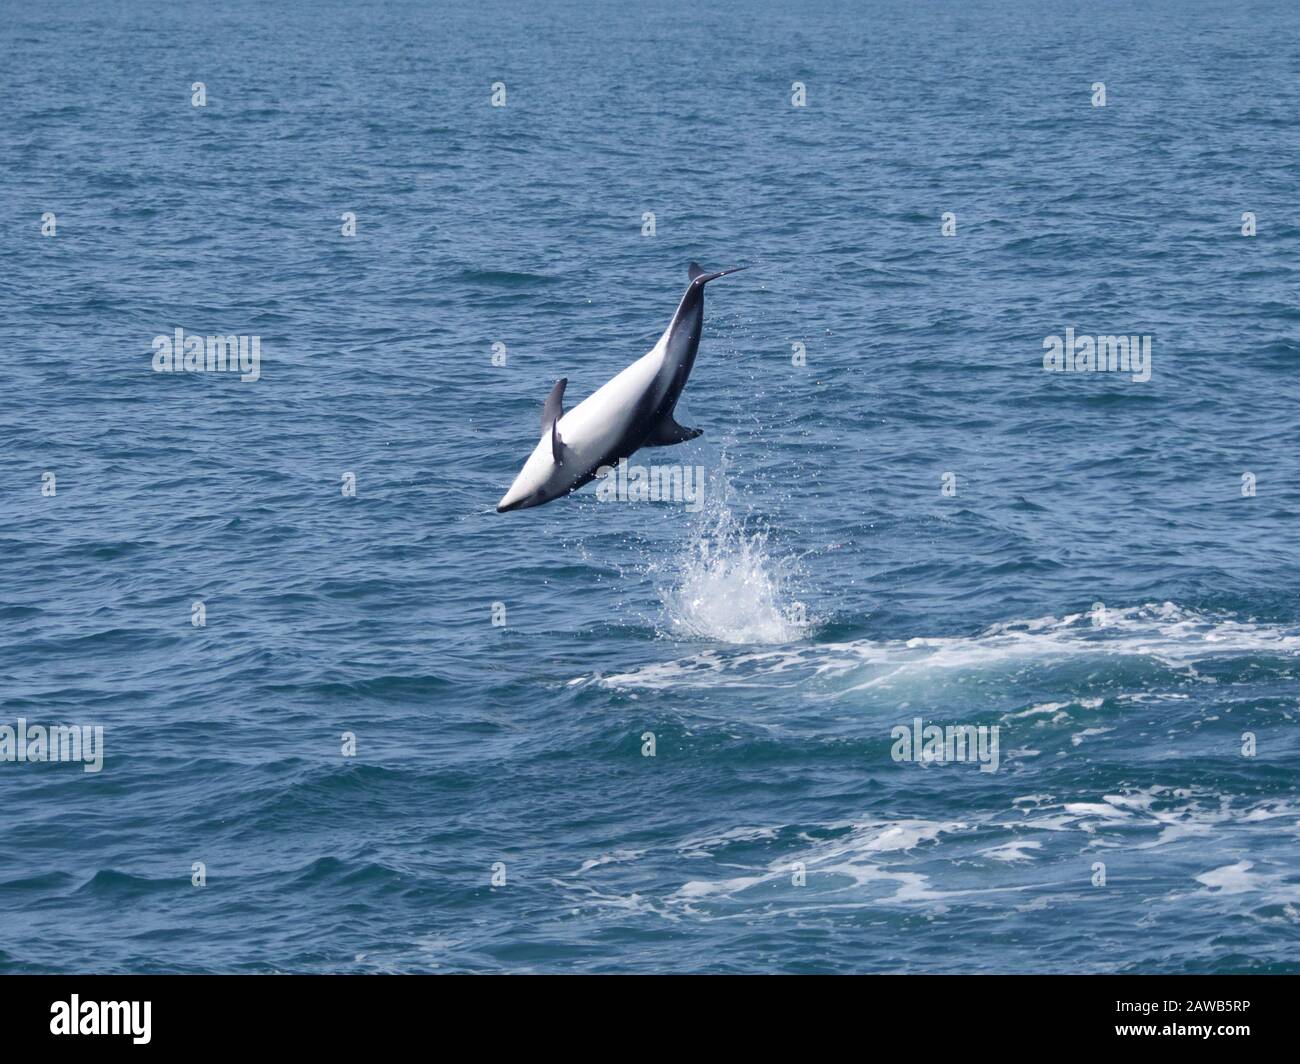 Dusky Dolphin (Lagenorhynchus obscurus) Leaping from the water off the coast of Kaikoura, New Zealand Stock Photo